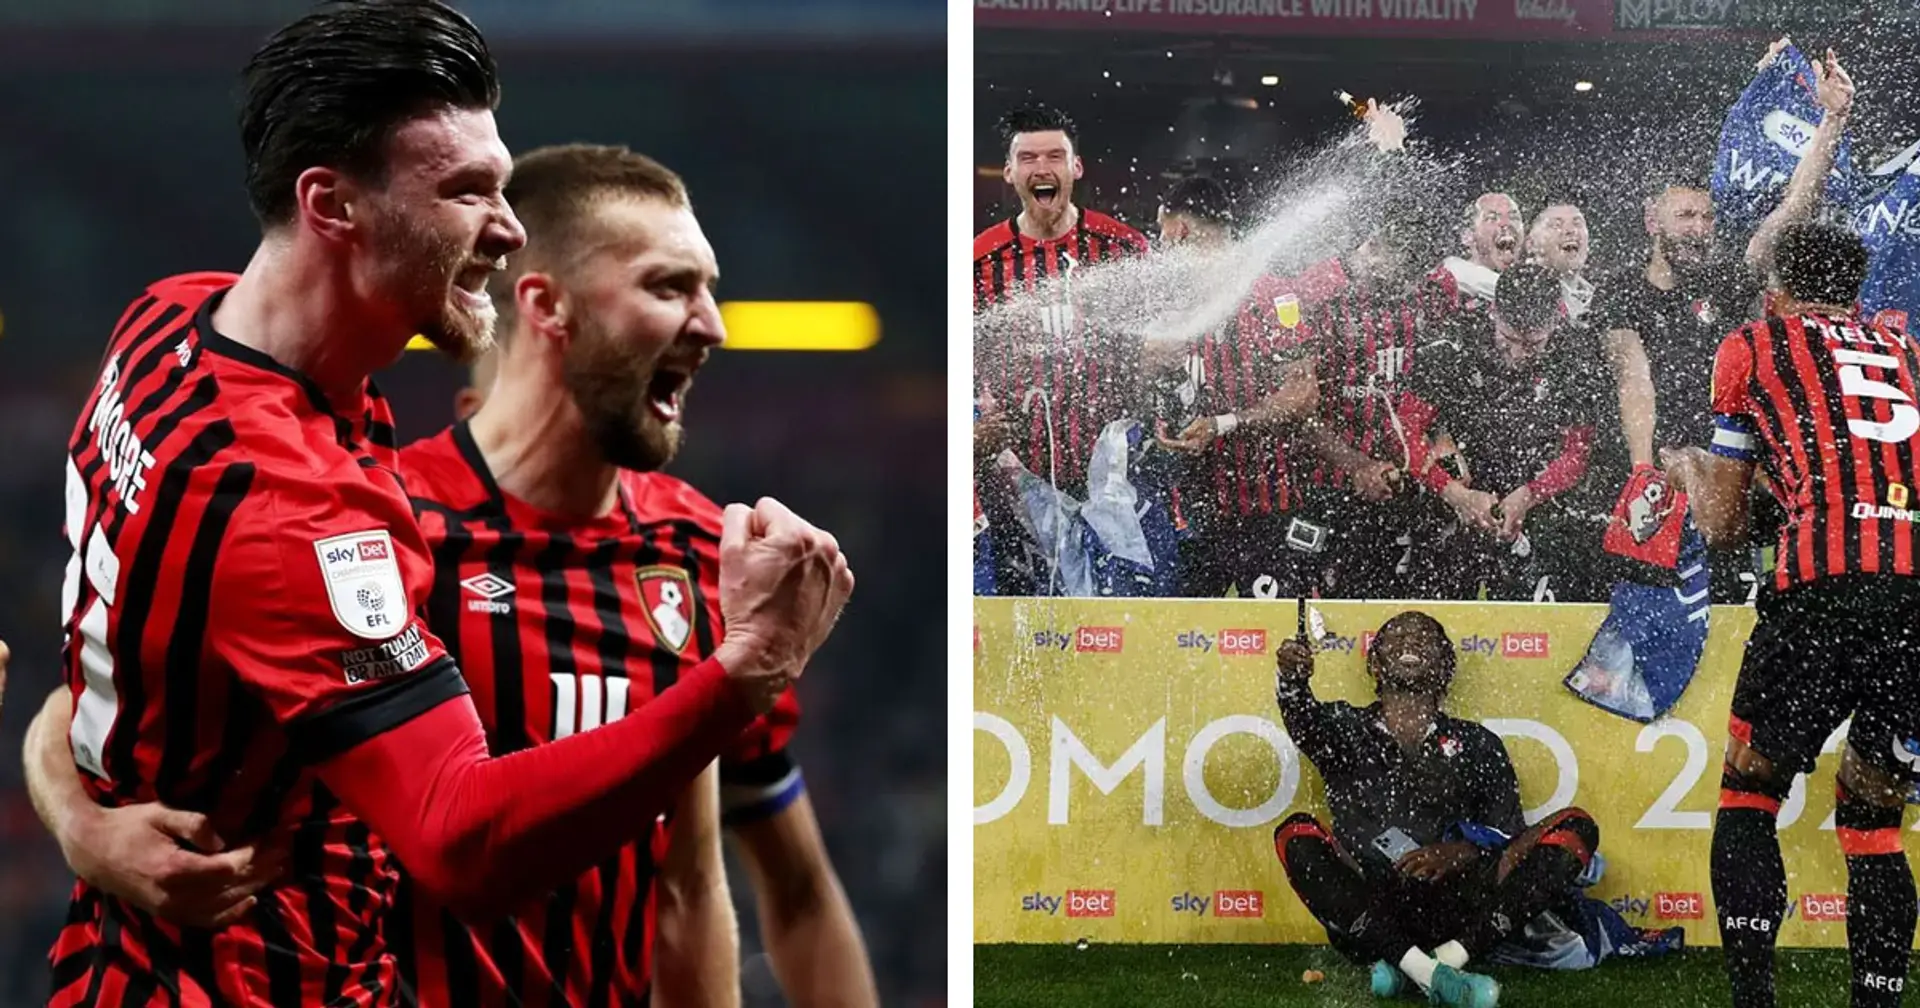 OFFICIAL: Bournemouth earn promotion back to the Premier League